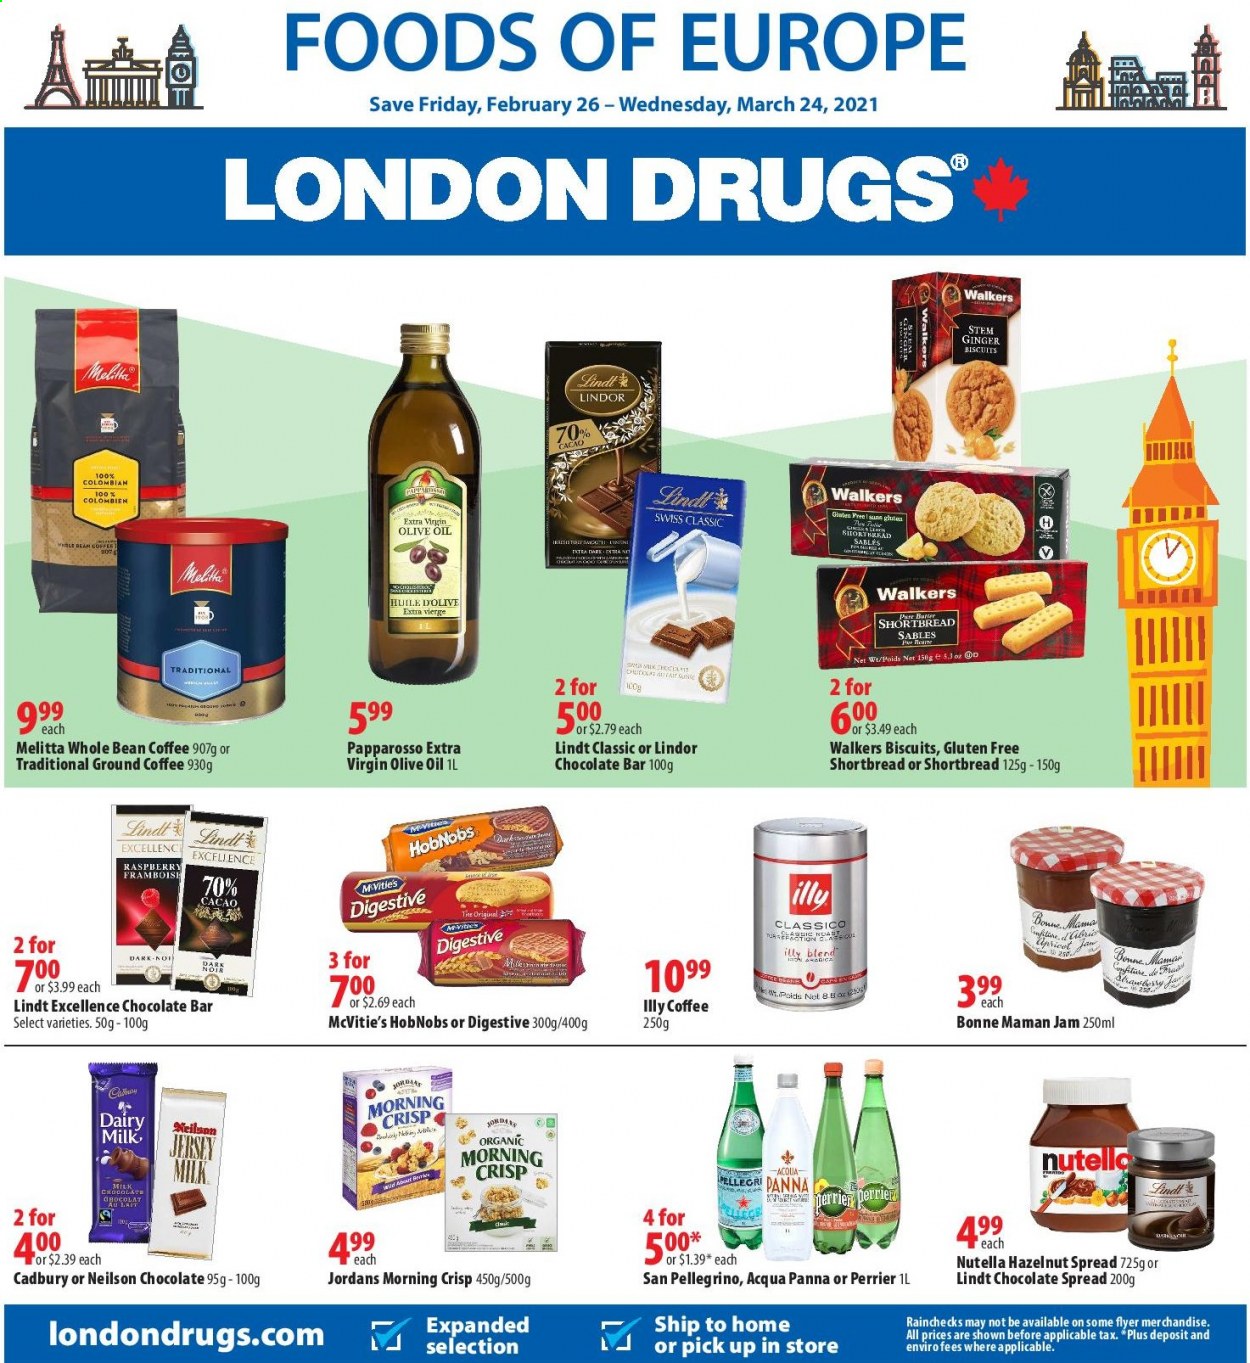 thumbnail - London Drugs Flyer - February 26, 2021 - March 24, 2021 - Sales products - biscuit, Cadbury, Dairy Milk, Digestive, chocolate bar, ginger, Classico, extra virgin olive oil, olive oil, oil, fruit jam, hazelnut spread, Perrier, San Pellegrino, coffee, ground coffee, Illy, Nutella. Page 1.